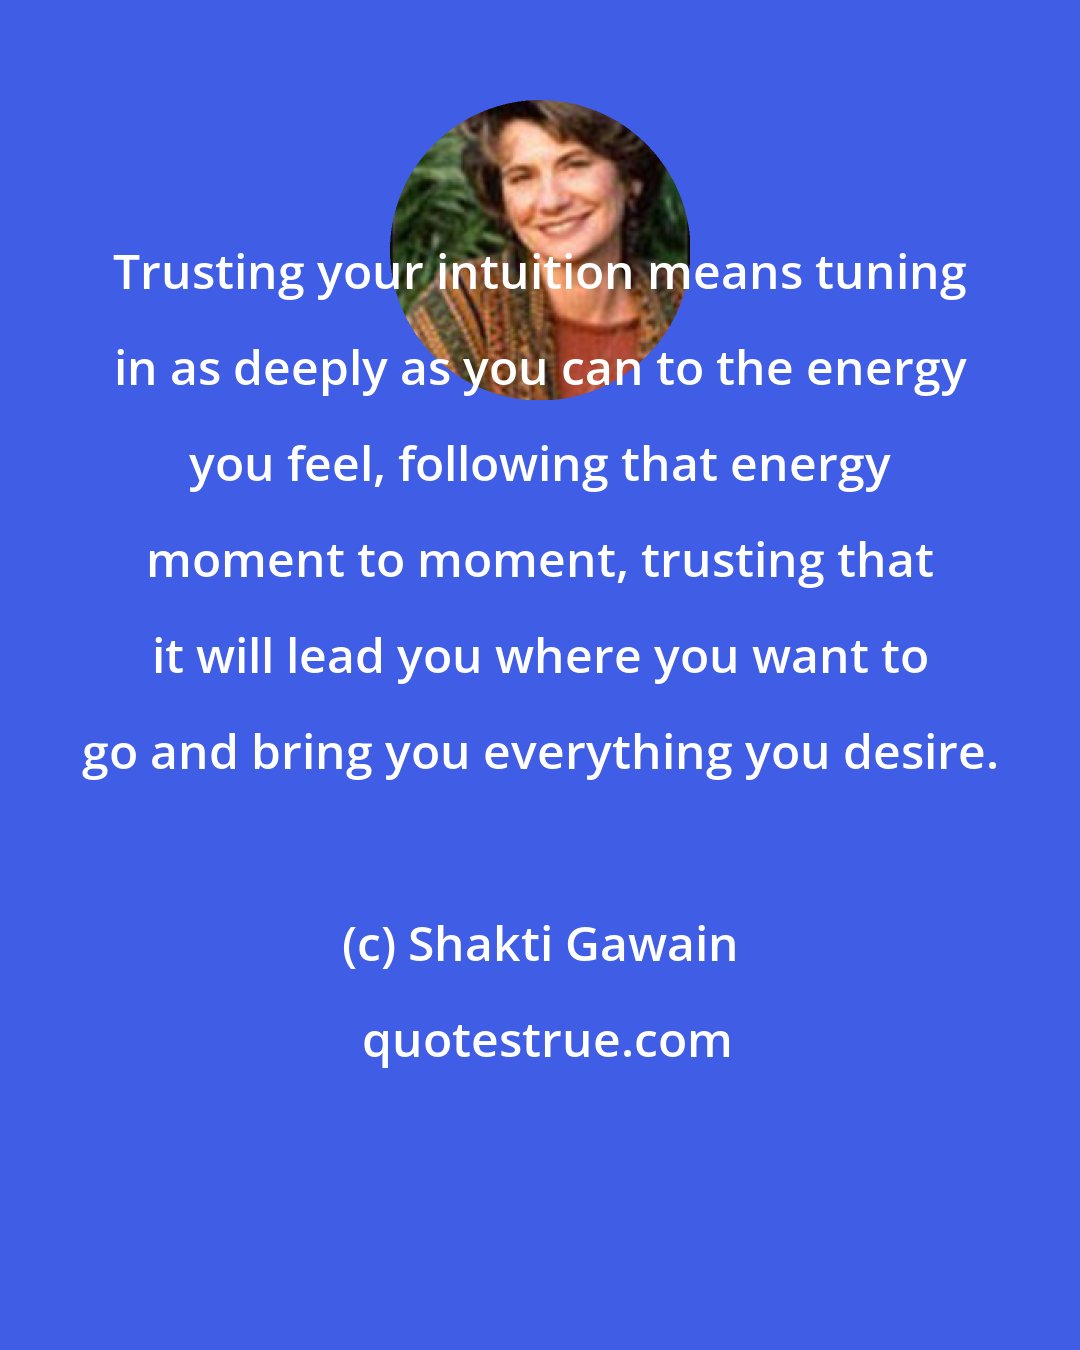 Shakti Gawain: Trusting your intuition means tuning in as deeply as you can to the energy you feel, following that energy moment to moment, trusting that it will lead you where you want to go and bring you everything you desire.